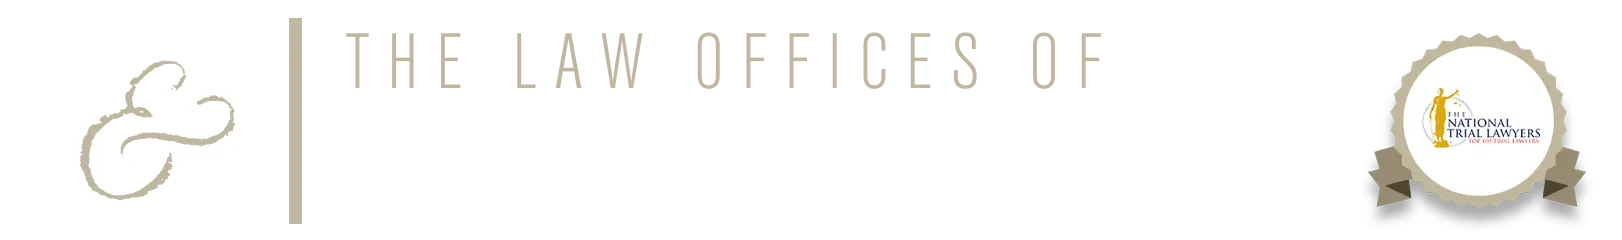 The Law Office of Rosenstock and Azran Logo